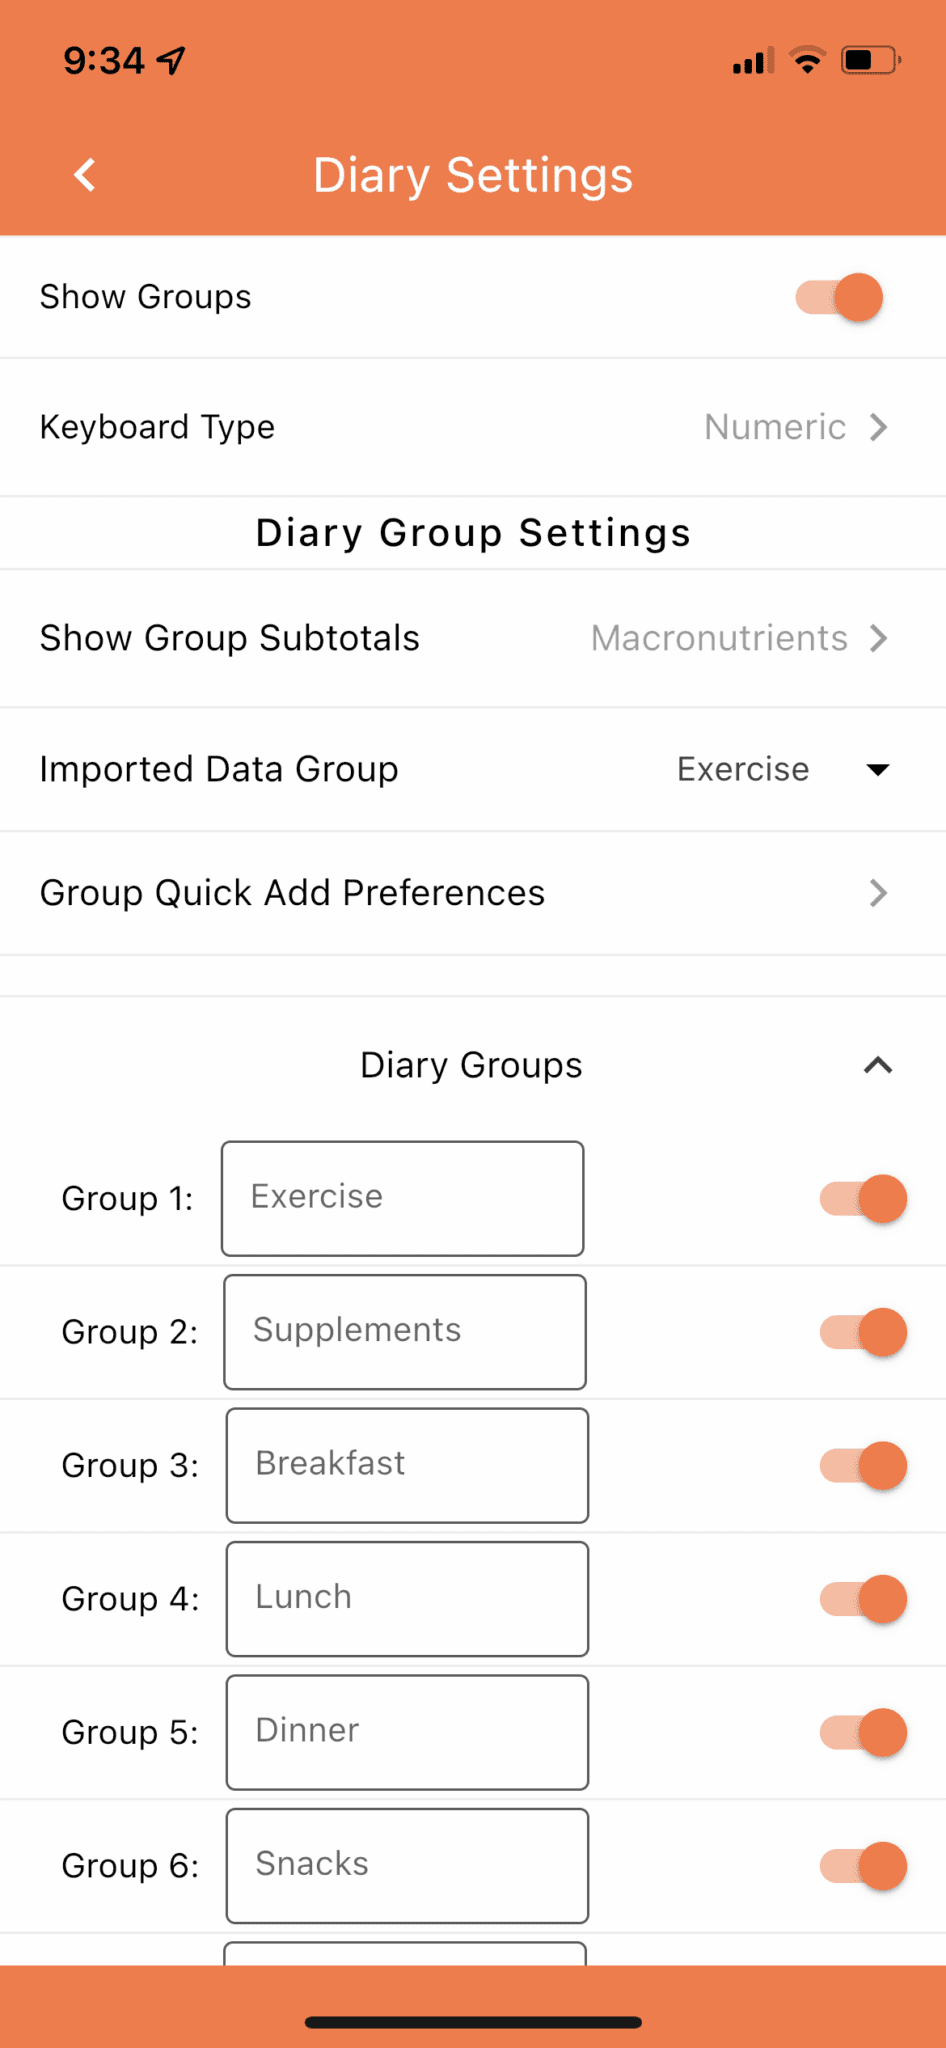 Choose what you want to name your Diary Groups.